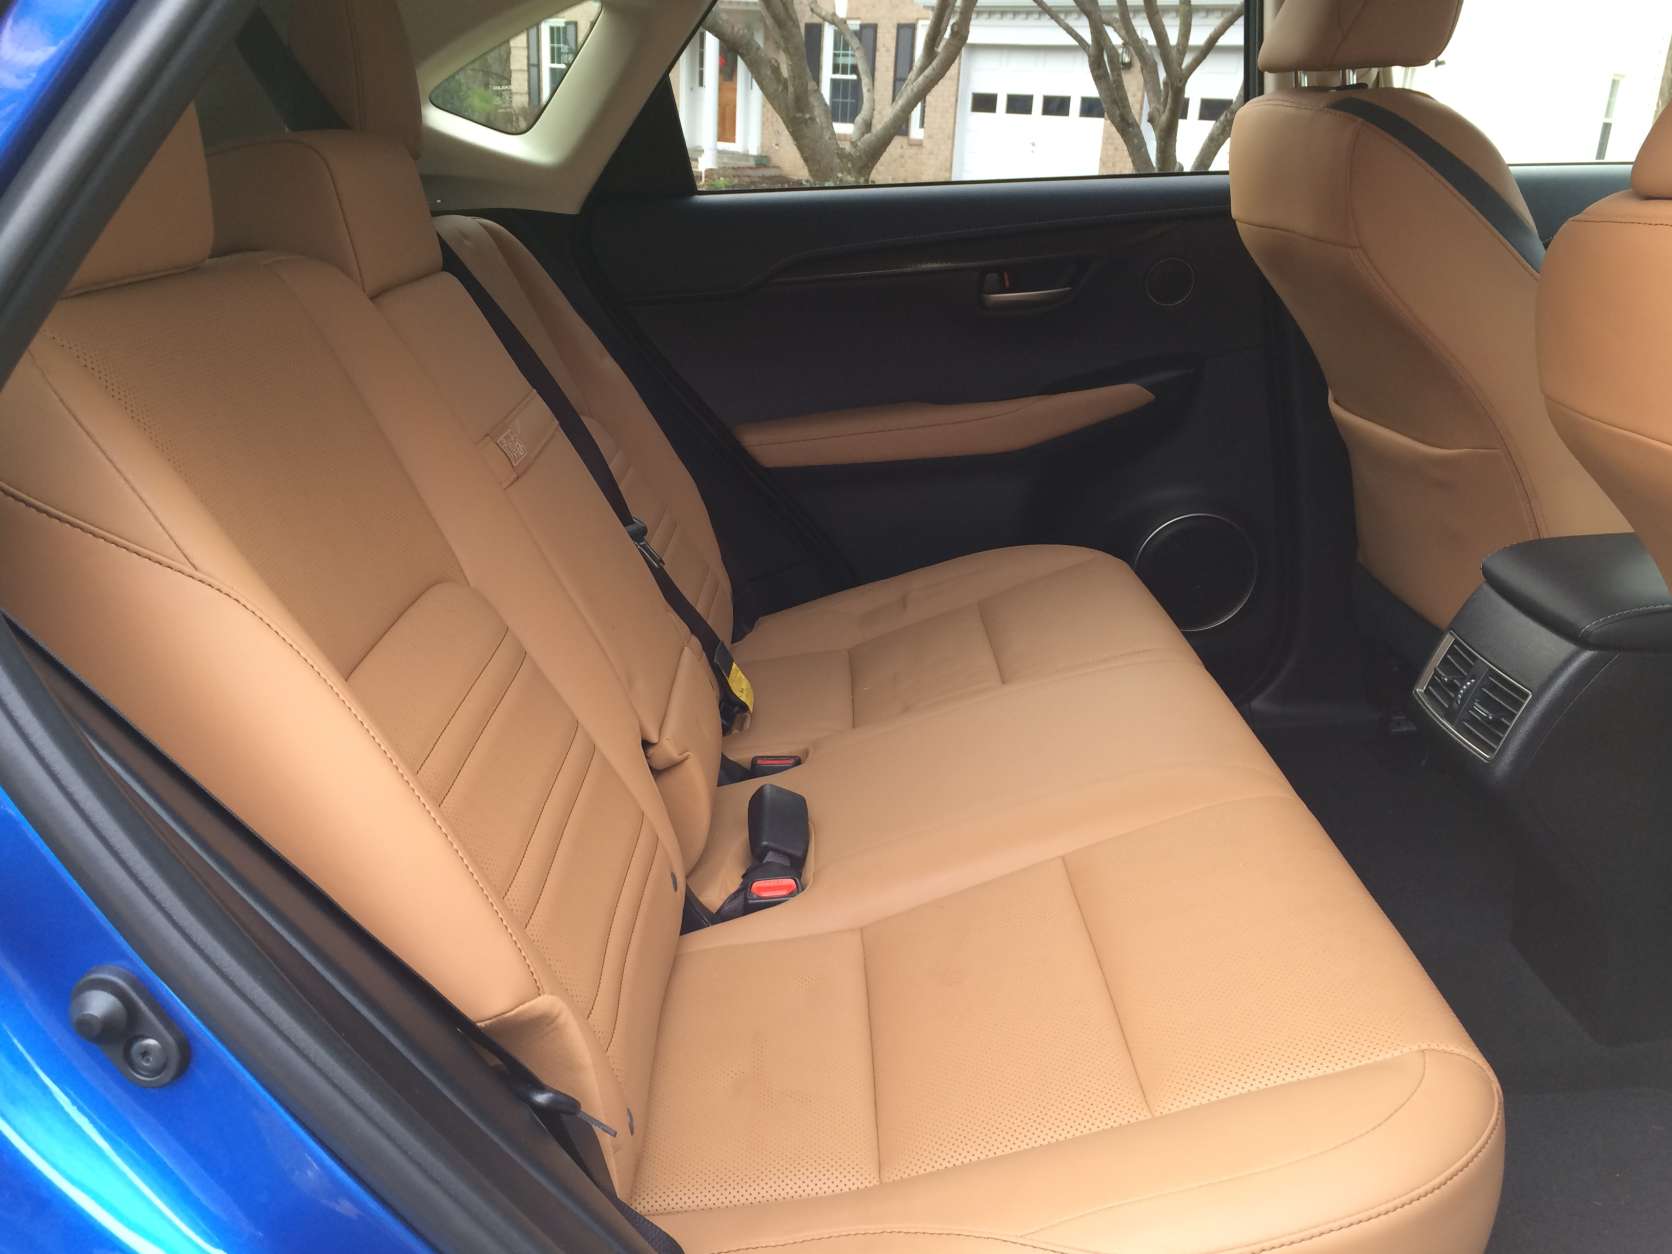 Rear seats are great for two, but would be tight for a third person. The rear cargo area isn’t very large when compared with some of the competition. (WTOP/Mike Parris)